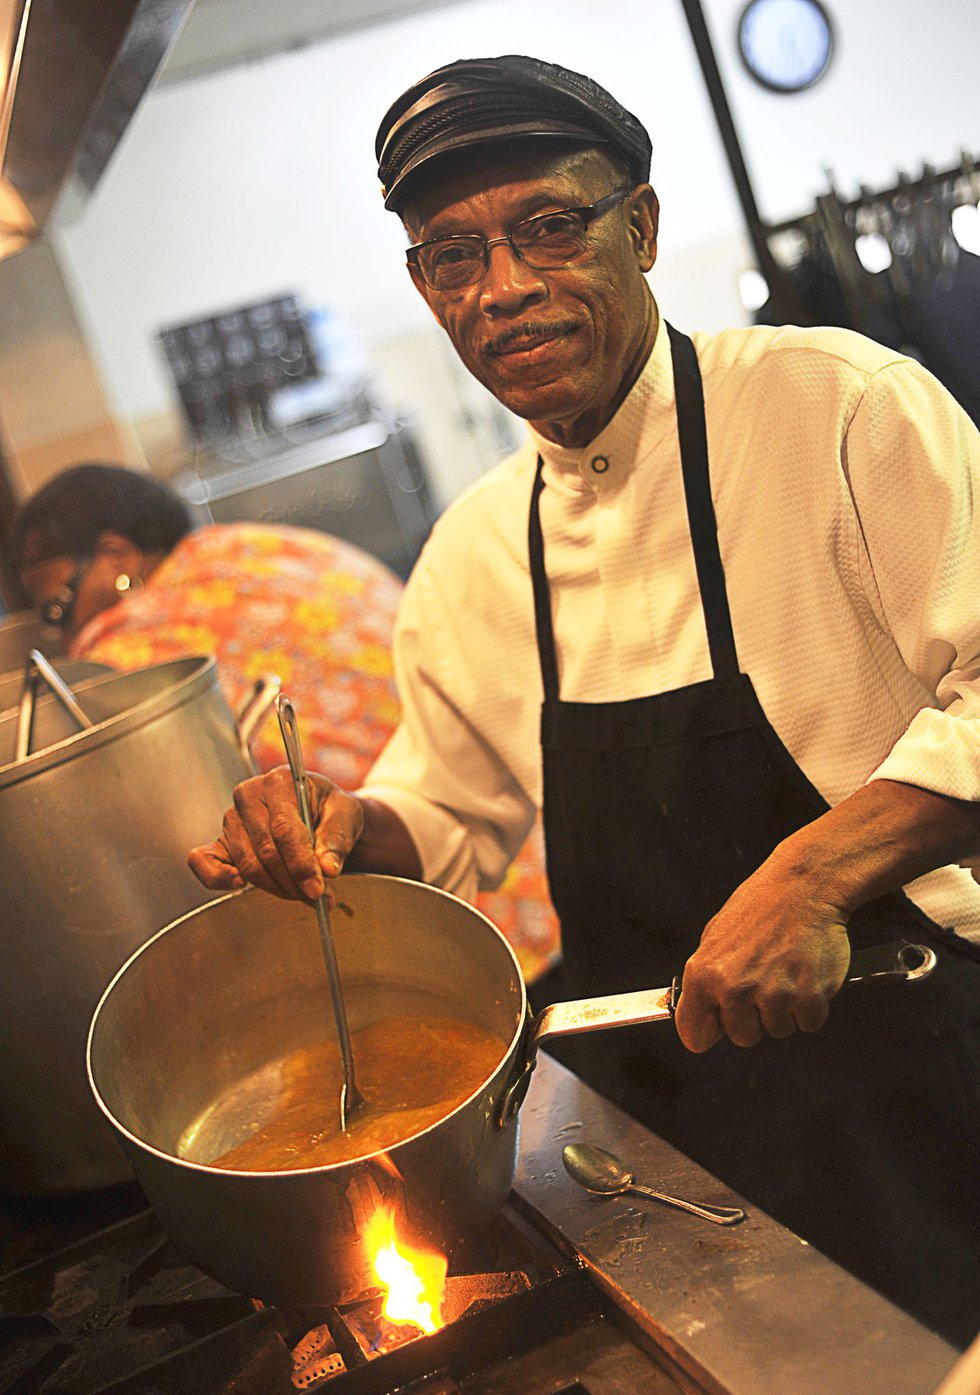 Stirring up good stuff in the kitchen is a labor of love for owner Willie Earl Bates, who first ate at The Four Way when he was 10 years old.